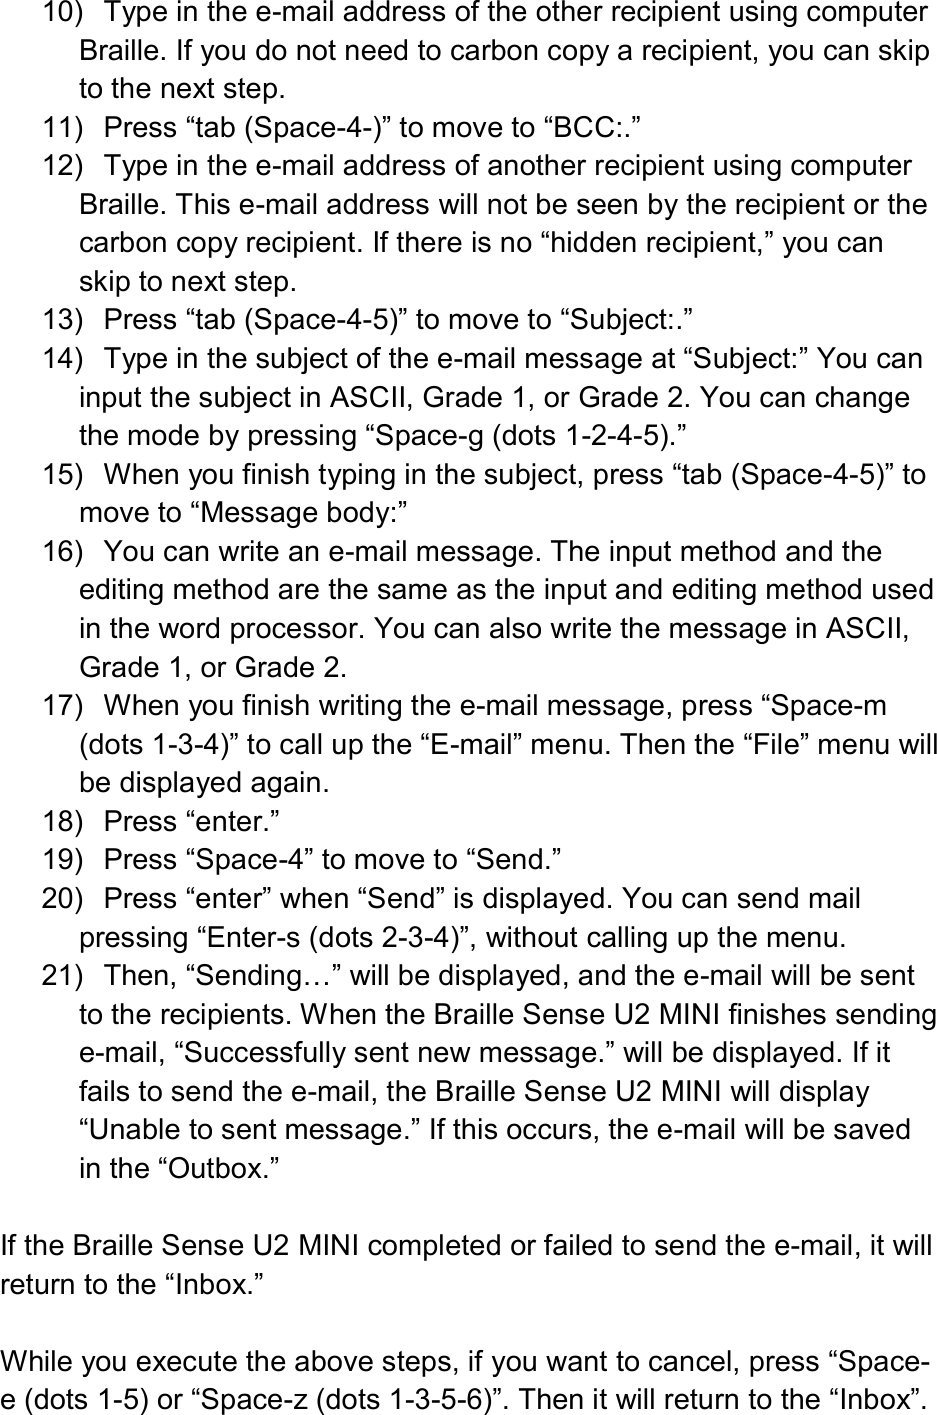  10)  Type in the e-mail address of the other recipient using computer Braille. If you do not need to carbon copy a recipient, you can skip to the next step. 11)  Press “tab (Space-4-)” to move to “BCC:.” 12)  Type in the e-mail address of another recipient using computer Braille. This e-mail address will not be seen by the recipient or the carbon copy recipient. If there is no “hidden recipient,” you can skip to next step. 13)  Press “tab (Space-4-5)” to move to “Subject:.” 14)  Type in the subject of the e-mail message at “Subject:” You can input the subject in ASCII, Grade 1, or Grade 2. You can change the mode by pressing “Space-g (dots 1-2-4-5).” 15)  When you finish typing in the subject, press “tab (Space-4-5)” to move to “Message body:” 16)  You can write an e-mail message. The input method and the editing method are the same as the input and editing method used in the word processor. You can also write the message in ASCII, Grade 1, or Grade 2. 17)  When you finish writing the e-mail message, press “Space-m (dots 1-3-4)” to call up the “E-mail” menu. Then the “File” menu will be displayed again. 18)  Press “enter.” 19)  Press “Space-4” to move to “Send.” 20)  Press “enter” when “Send” is displayed. You can send mail pressing “Enter-s (dots 2-3-4)”, without calling up the menu. 21)  Then, “Sending…” will be displayed, and the e-mail will be sent to the recipients. When the Braille Sense U2 MINI finishes sending e-mail, “Successfully sent new message.” will be displayed. If it fails to send the e-mail, the Braille Sense U2 MINI will display “Unable to sent message.” If this occurs, the e-mail will be saved in the “Outbox.”  If the Braille Sense U2 MINI completed or failed to send the e-mail, it will return to the “Inbox.”  While you execute the above steps, if you want to cancel, press “Space-e (dots 1-5) or “Space-z (dots 1-3-5-6)”. Then it will return to the “Inbox”. 